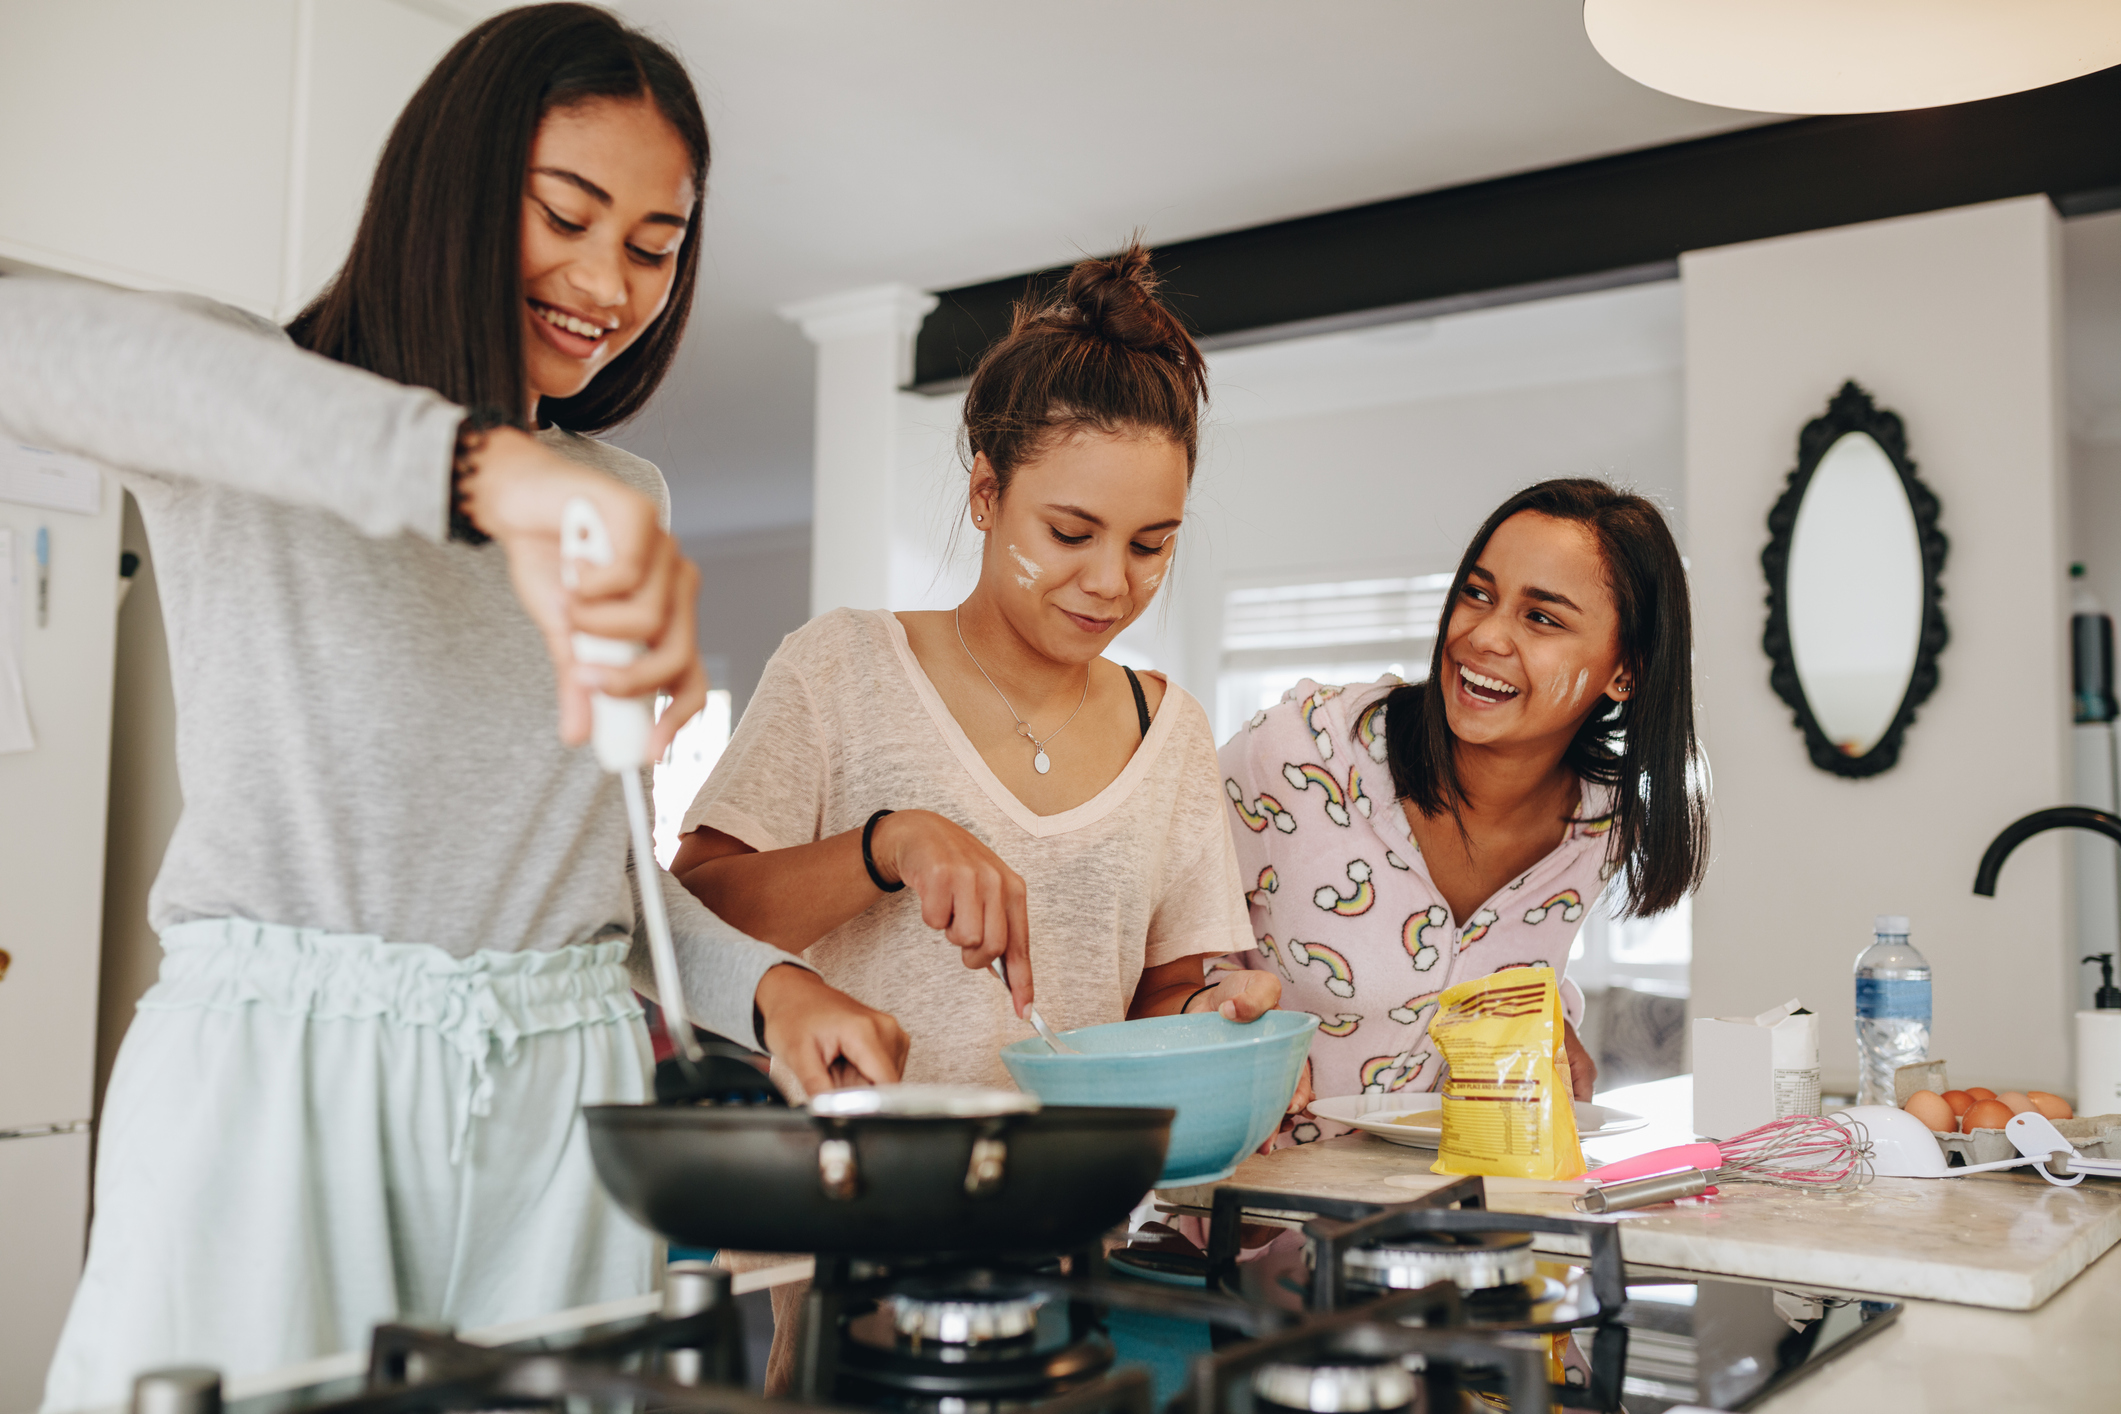 Three girls making food together standing in kitchen